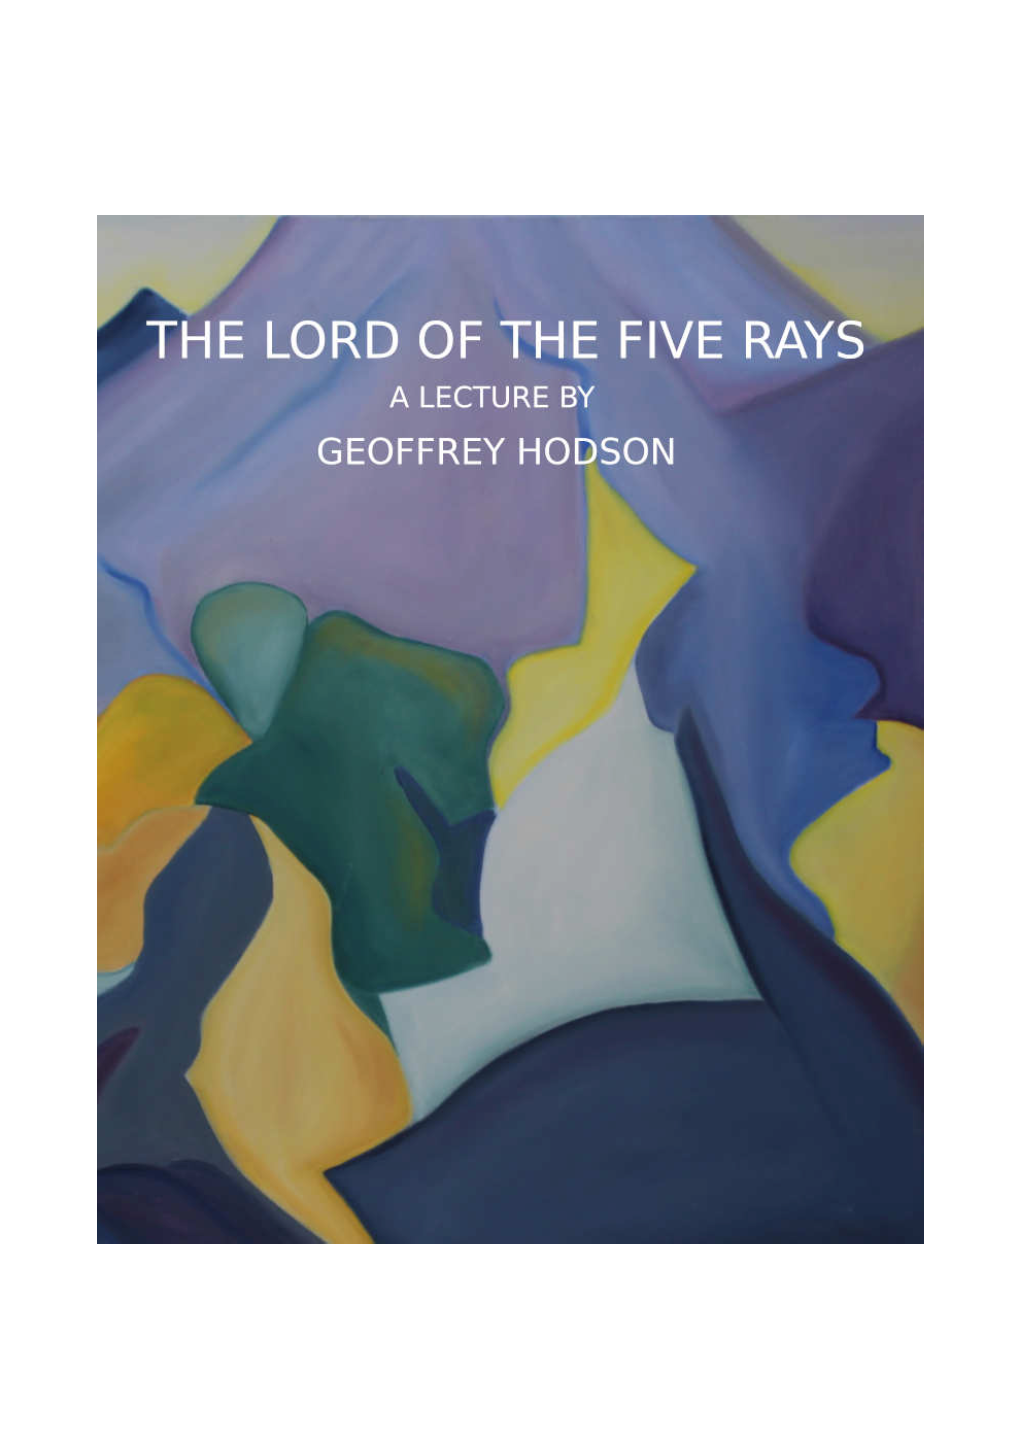 The Lord of the Five Rays